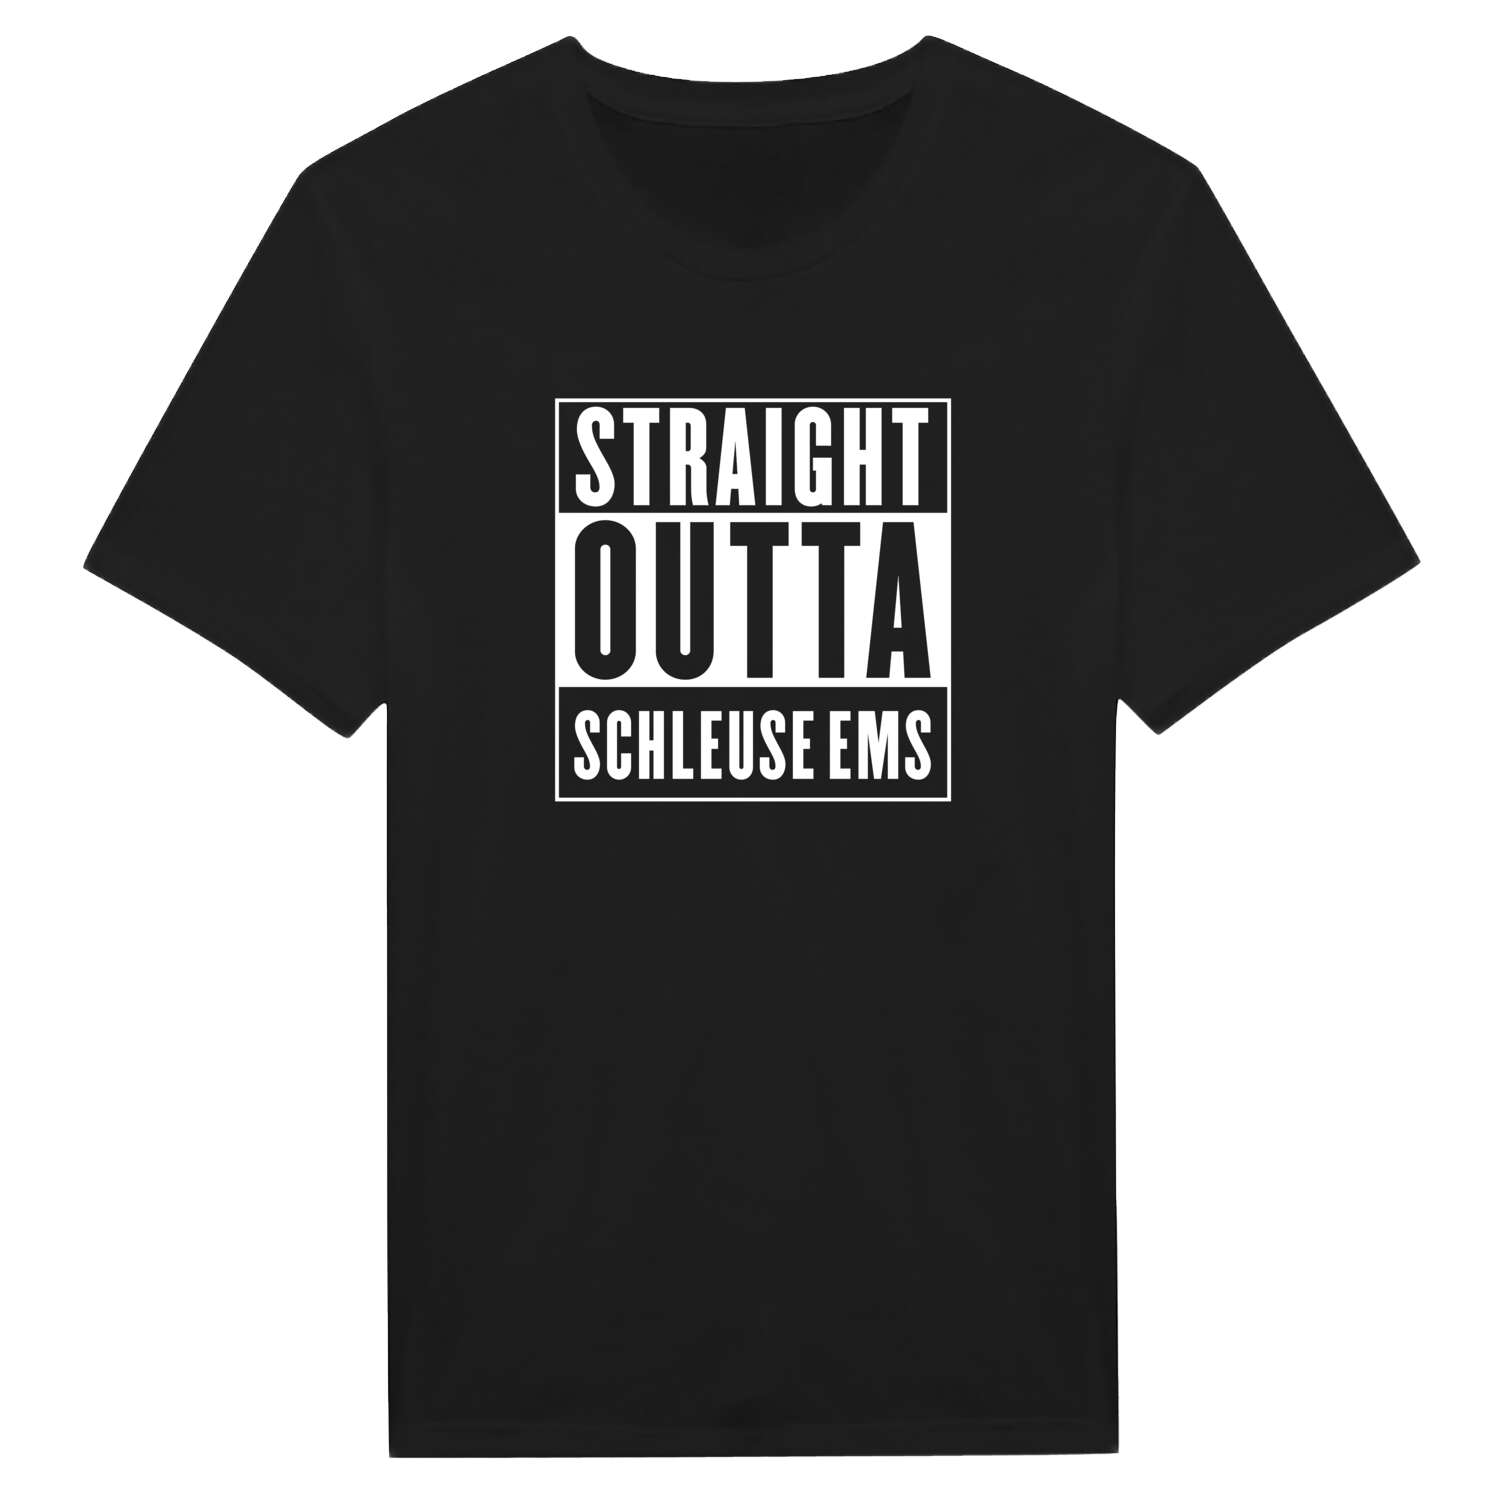 Schleuse Ems T-Shirt »Straight Outta«